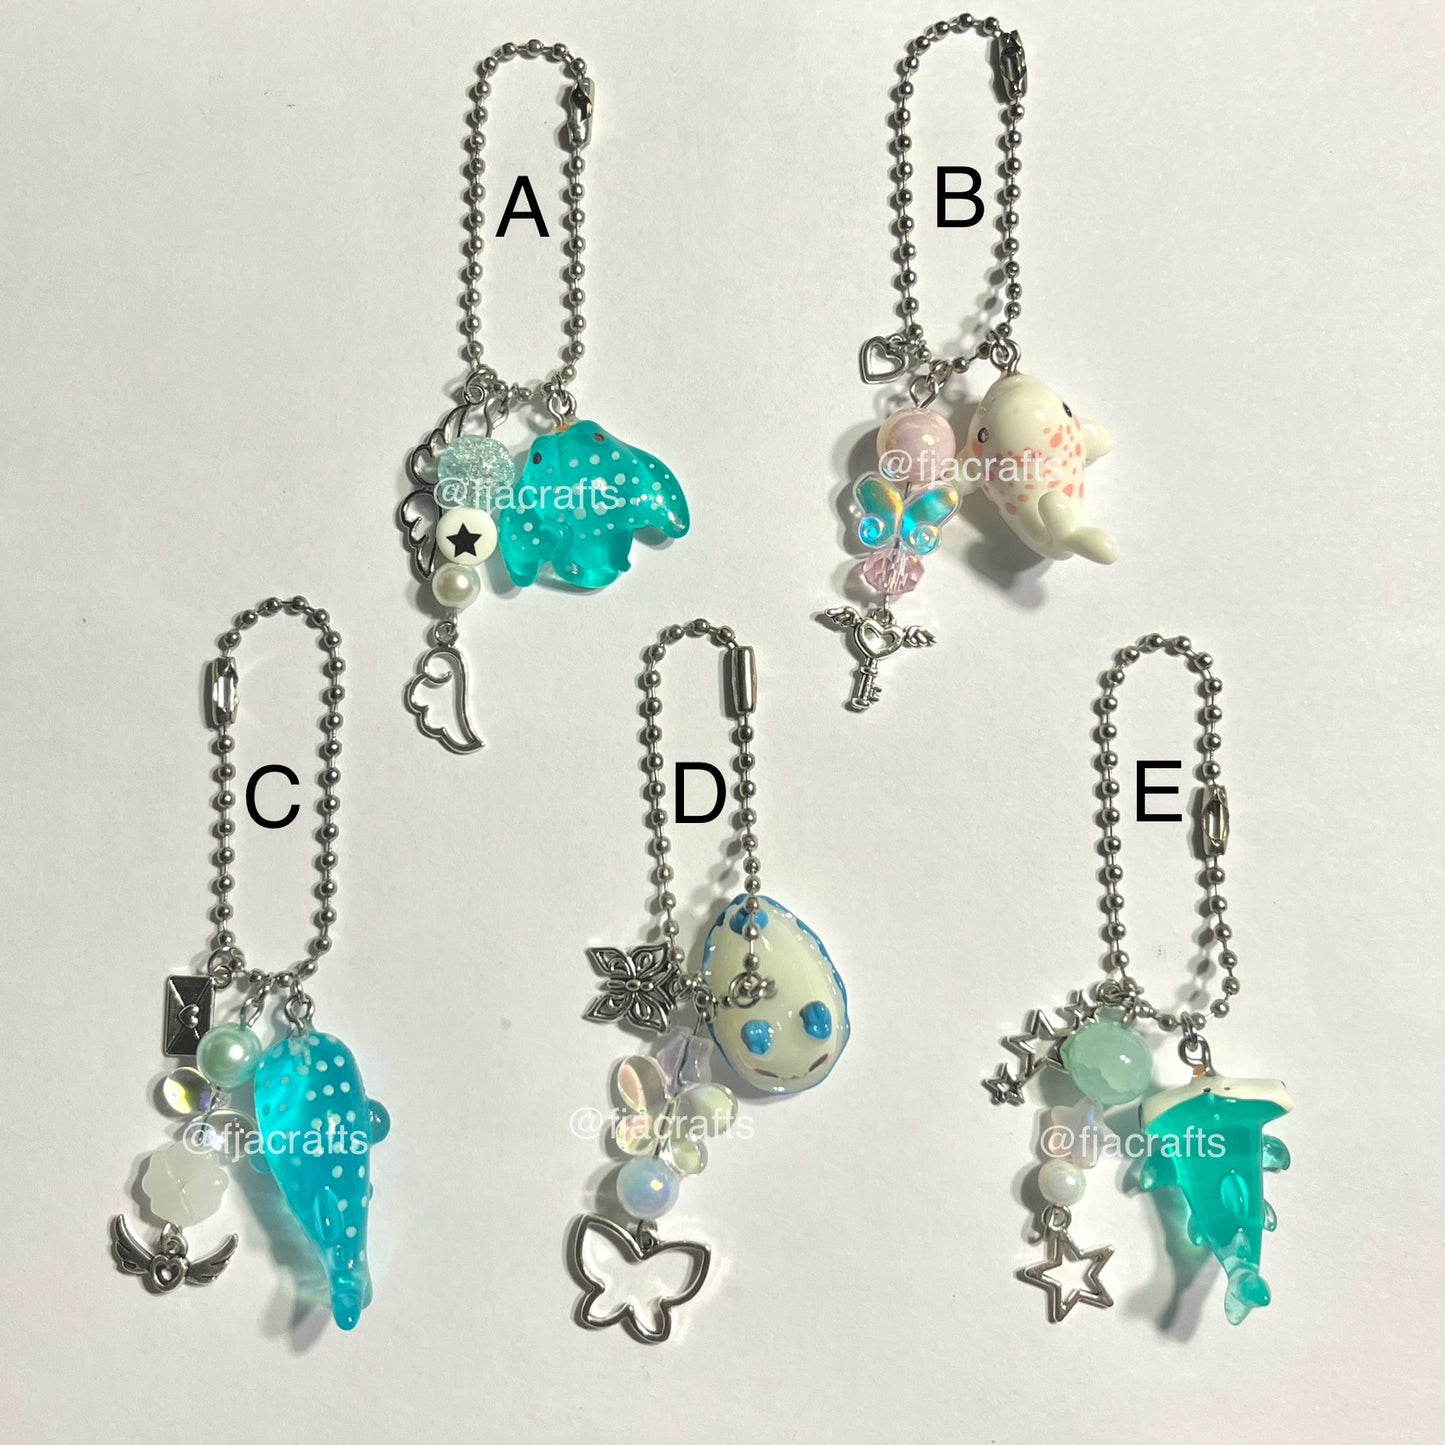 Ocean Critters Kawaii Beaded Keychain Bag Clip Charm | Atlantica Collection | whale, Shark, sting Ray, blue, teal, white, pink FJA Crafts